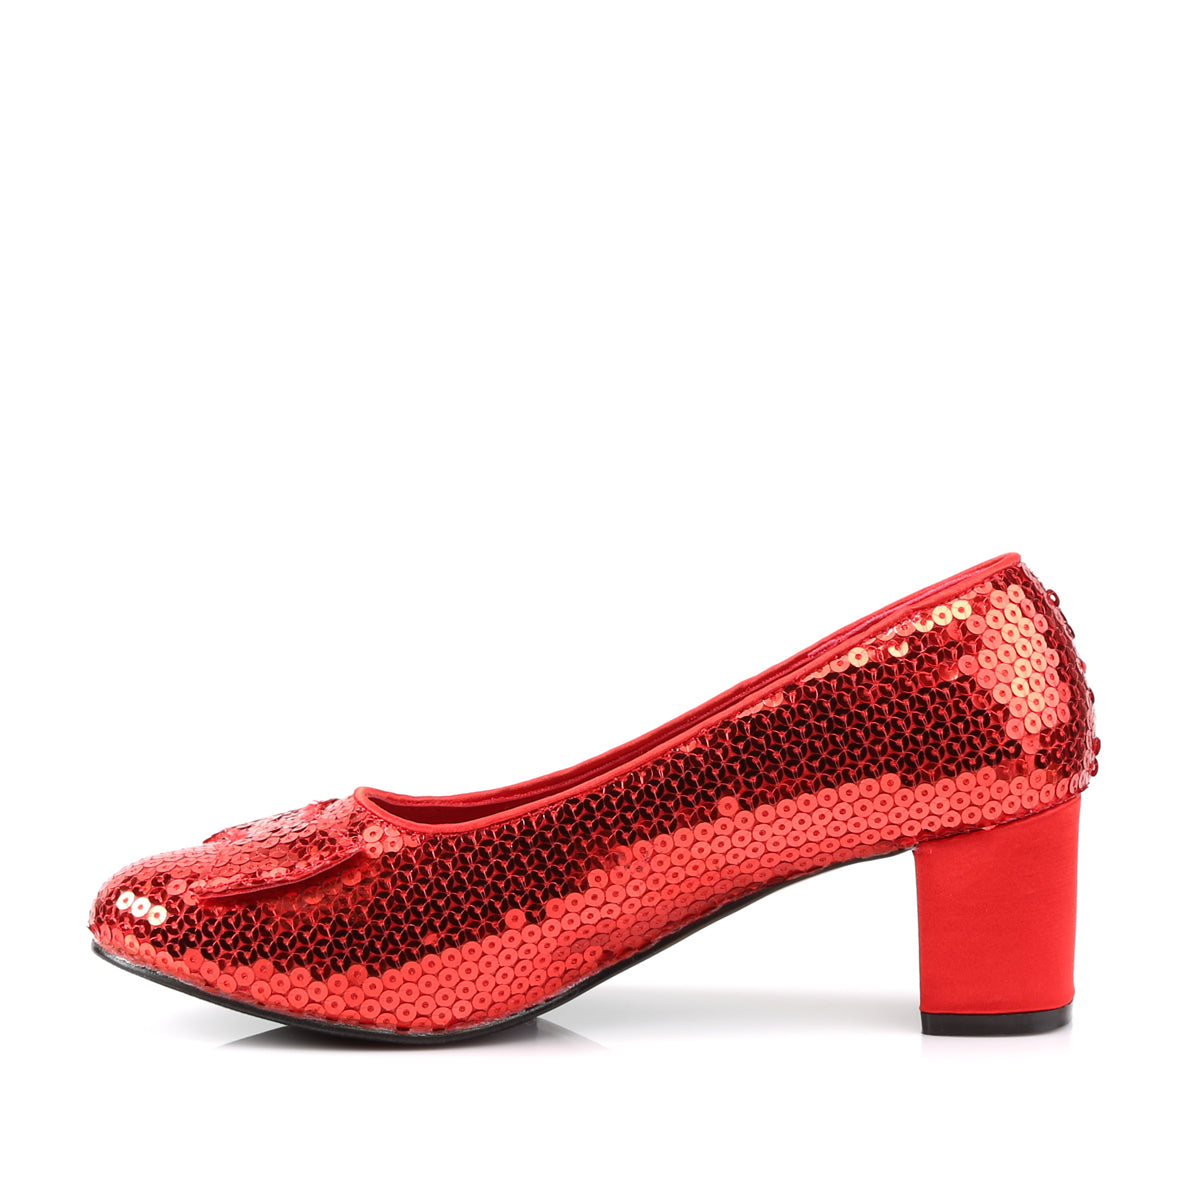 DOROTHY-01 2" Heel Red Sequins Women's Costume Shoes Funtasma Costume Shoes 